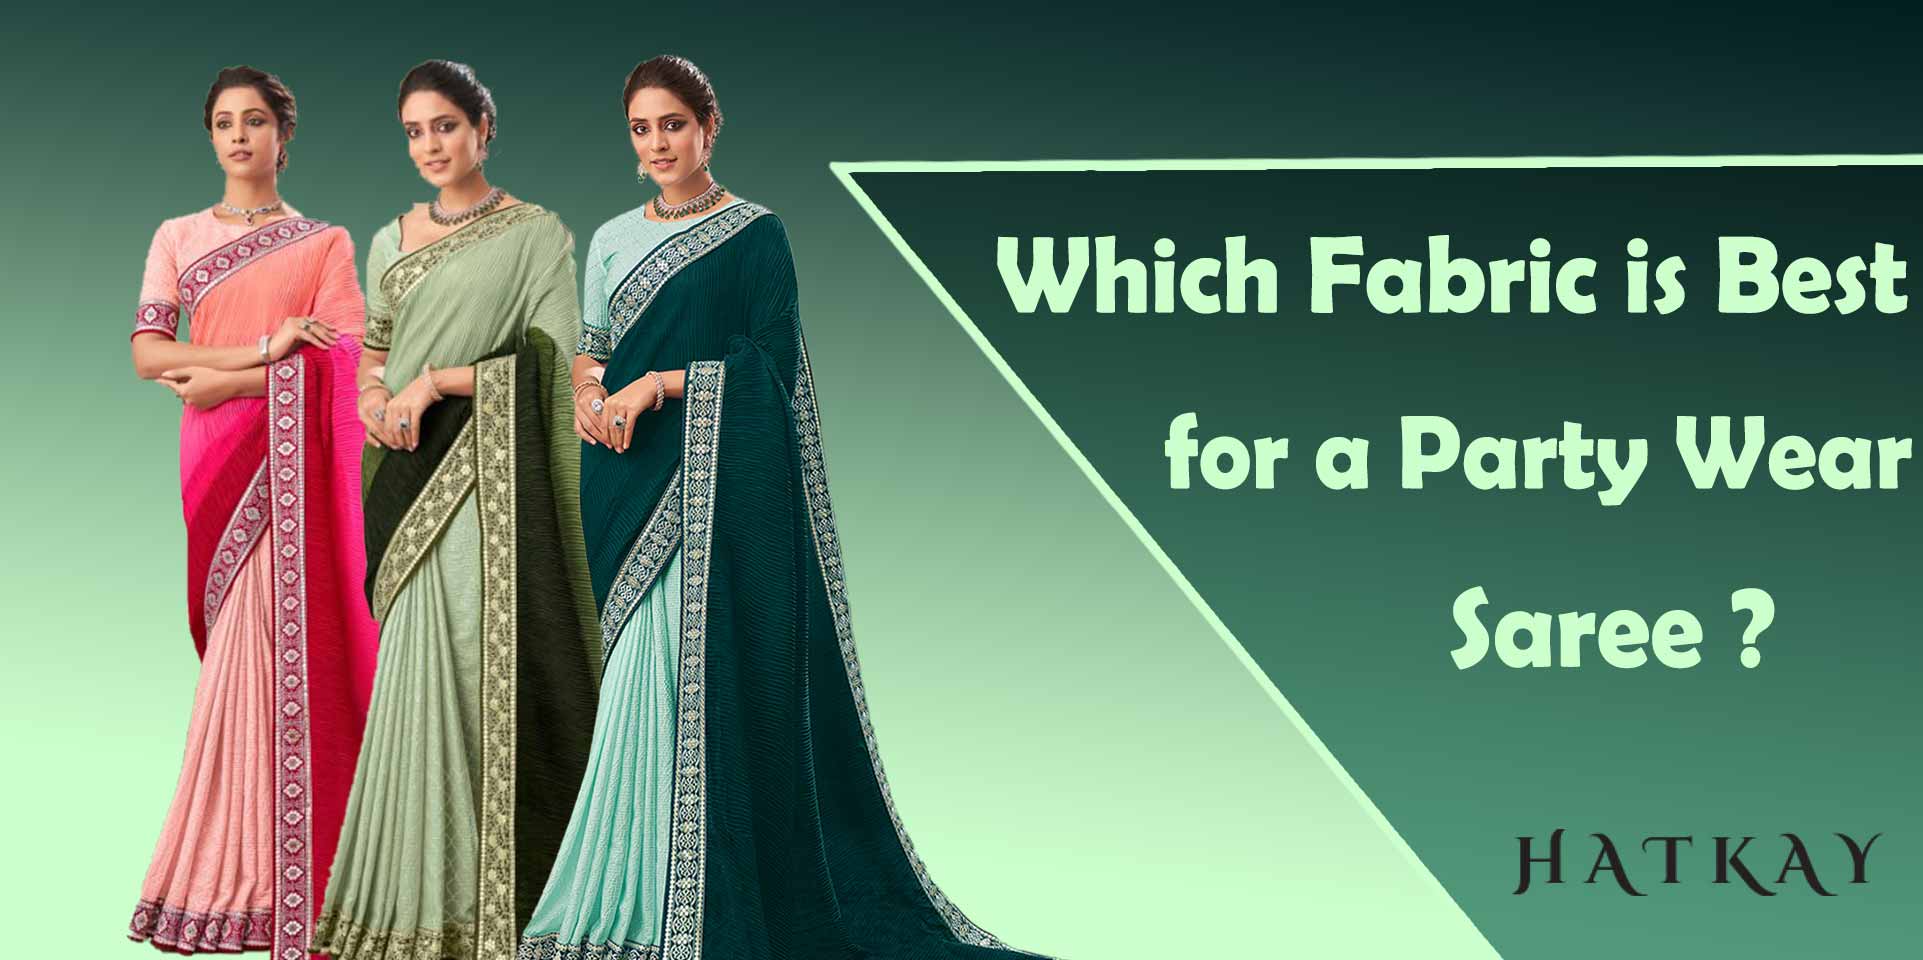 Which Fabric is Best for a Party Wear Saree?